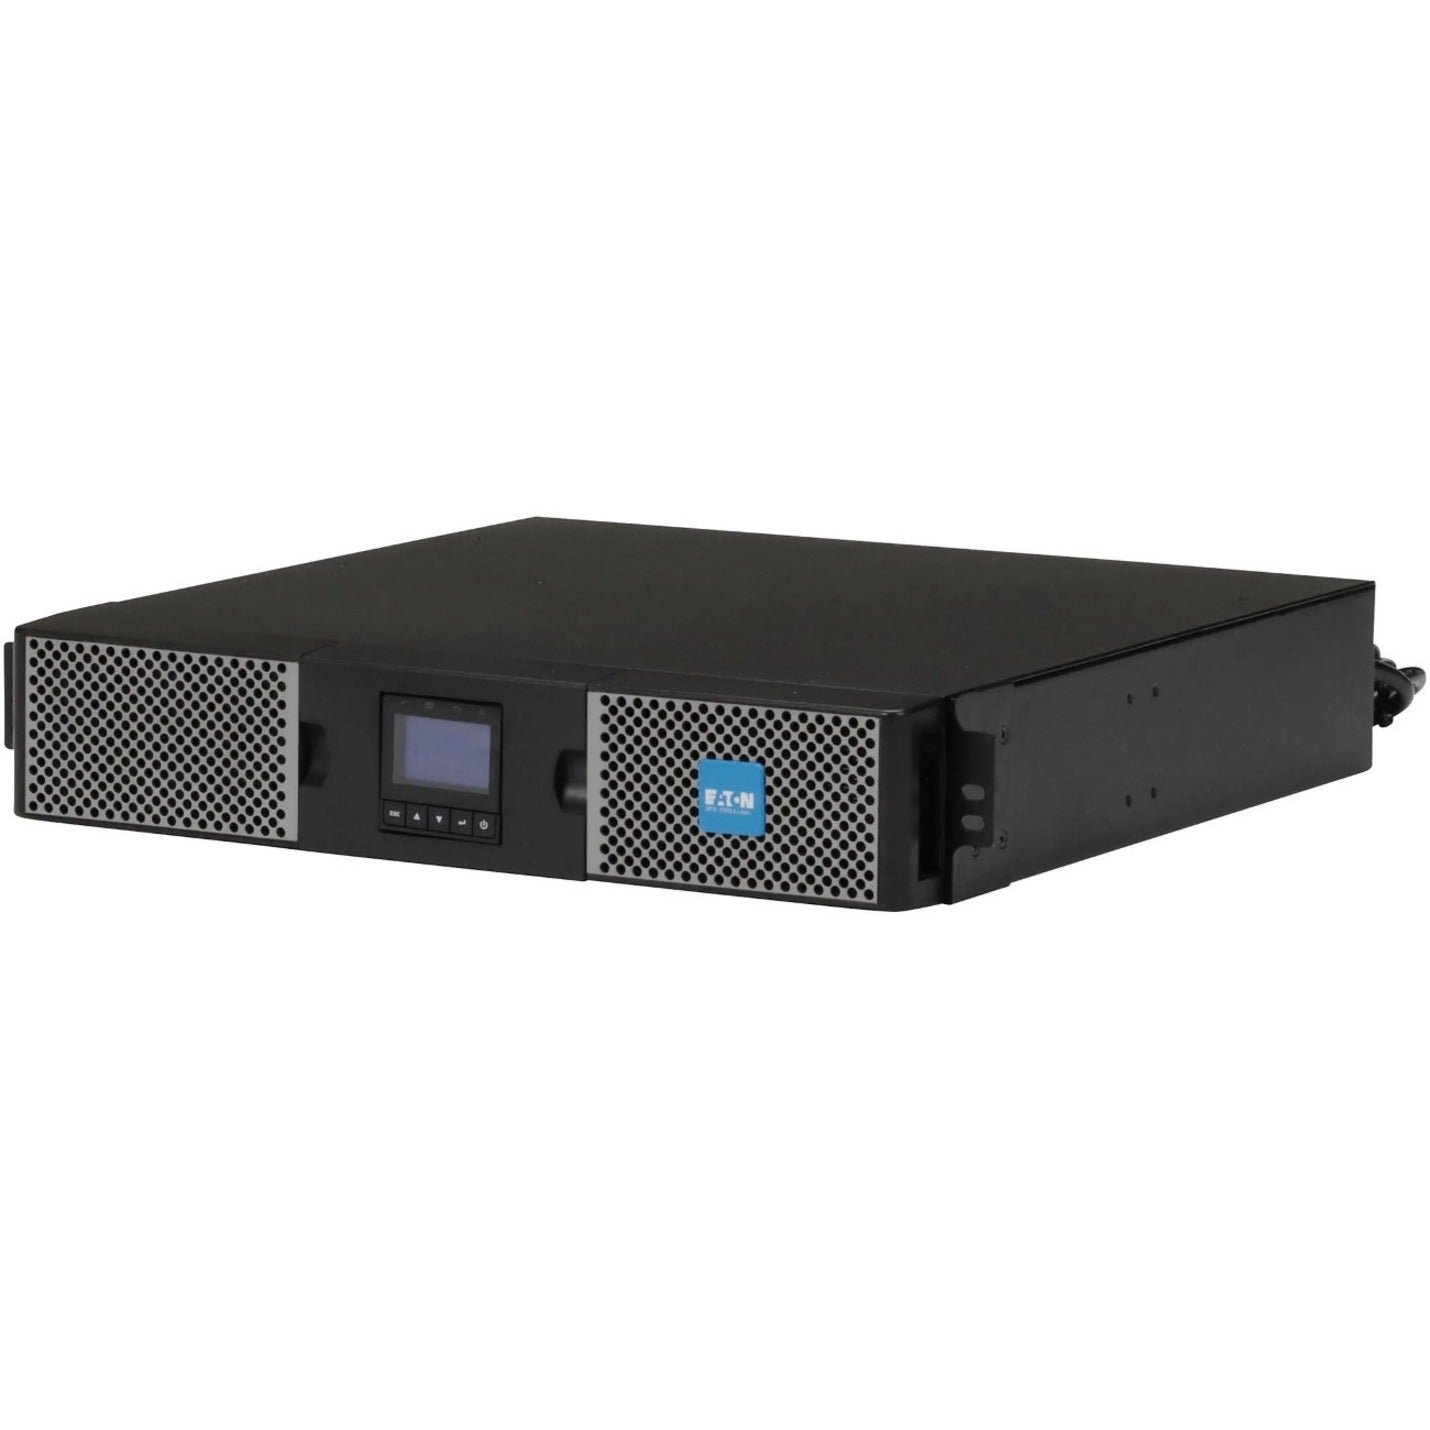 Eaton 9PX 1500VA 1350W 120V Online Double-Conversion UPS - 5-15P 8x 5-15R Outlets Lithium-ion Battery Cybersecure Network Card Option 2U Rack/Tower